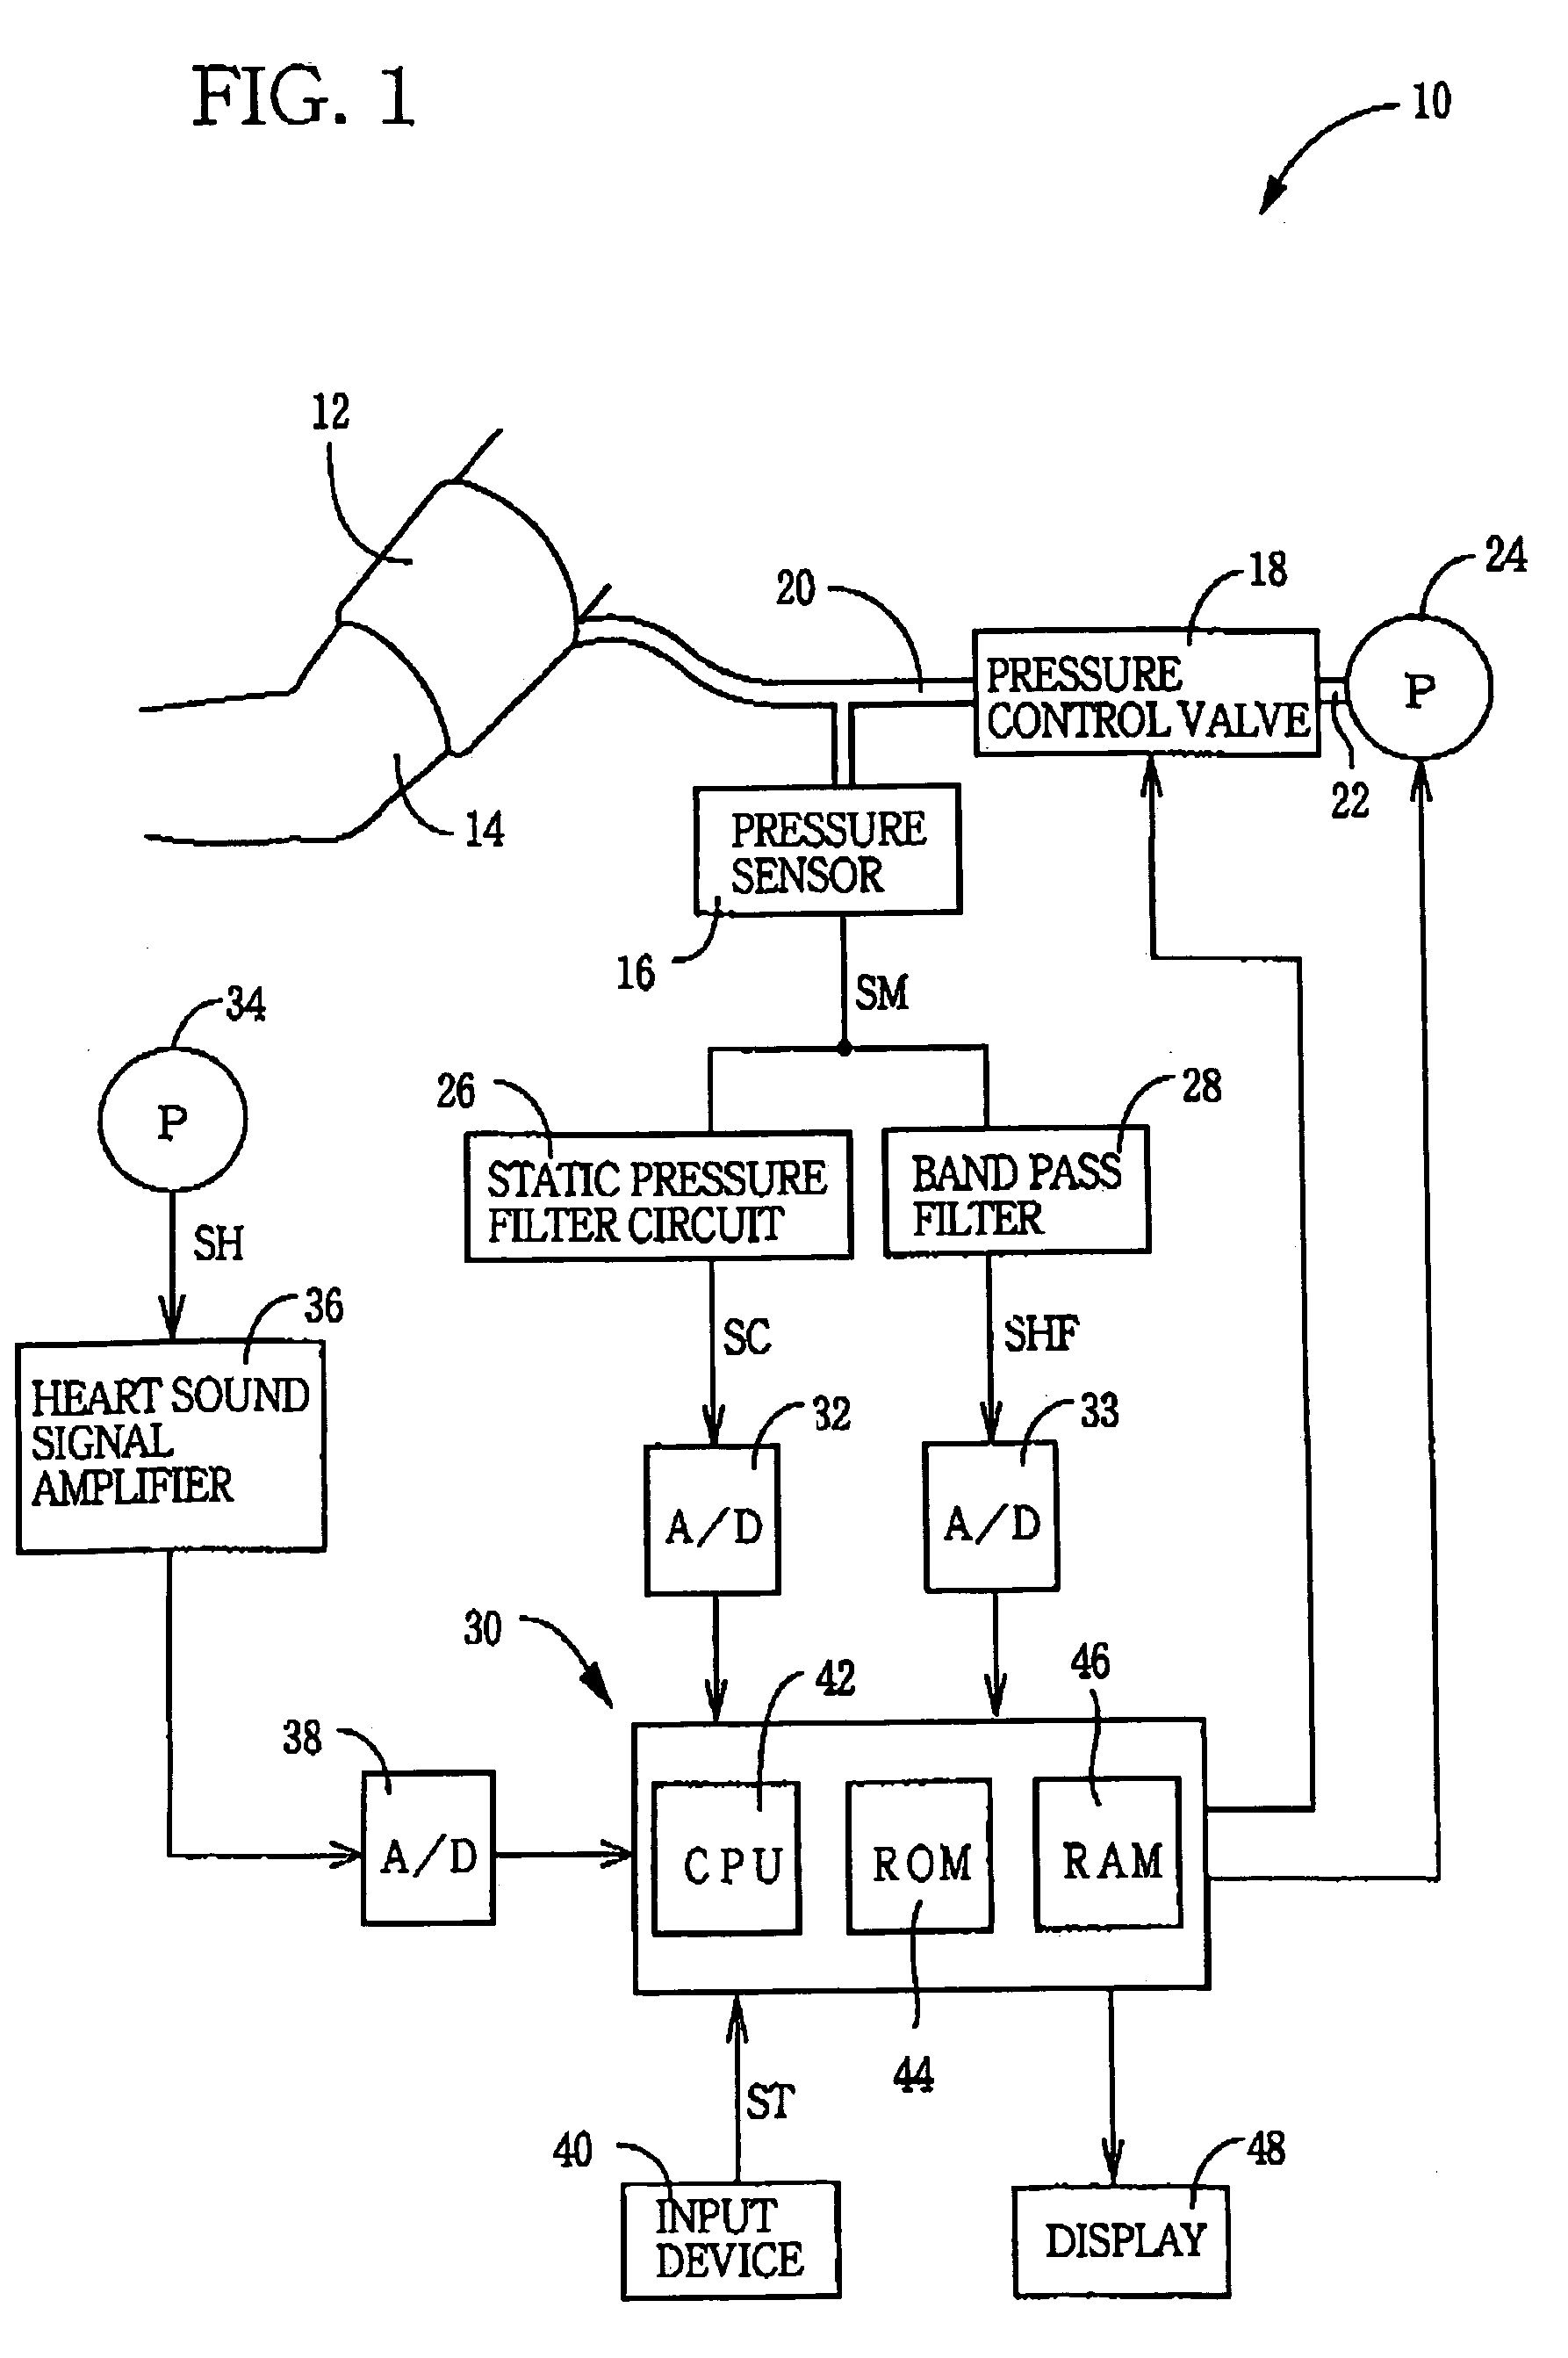 Filter for use with pulse-wave sensor and pulse wave analyzing apparatus